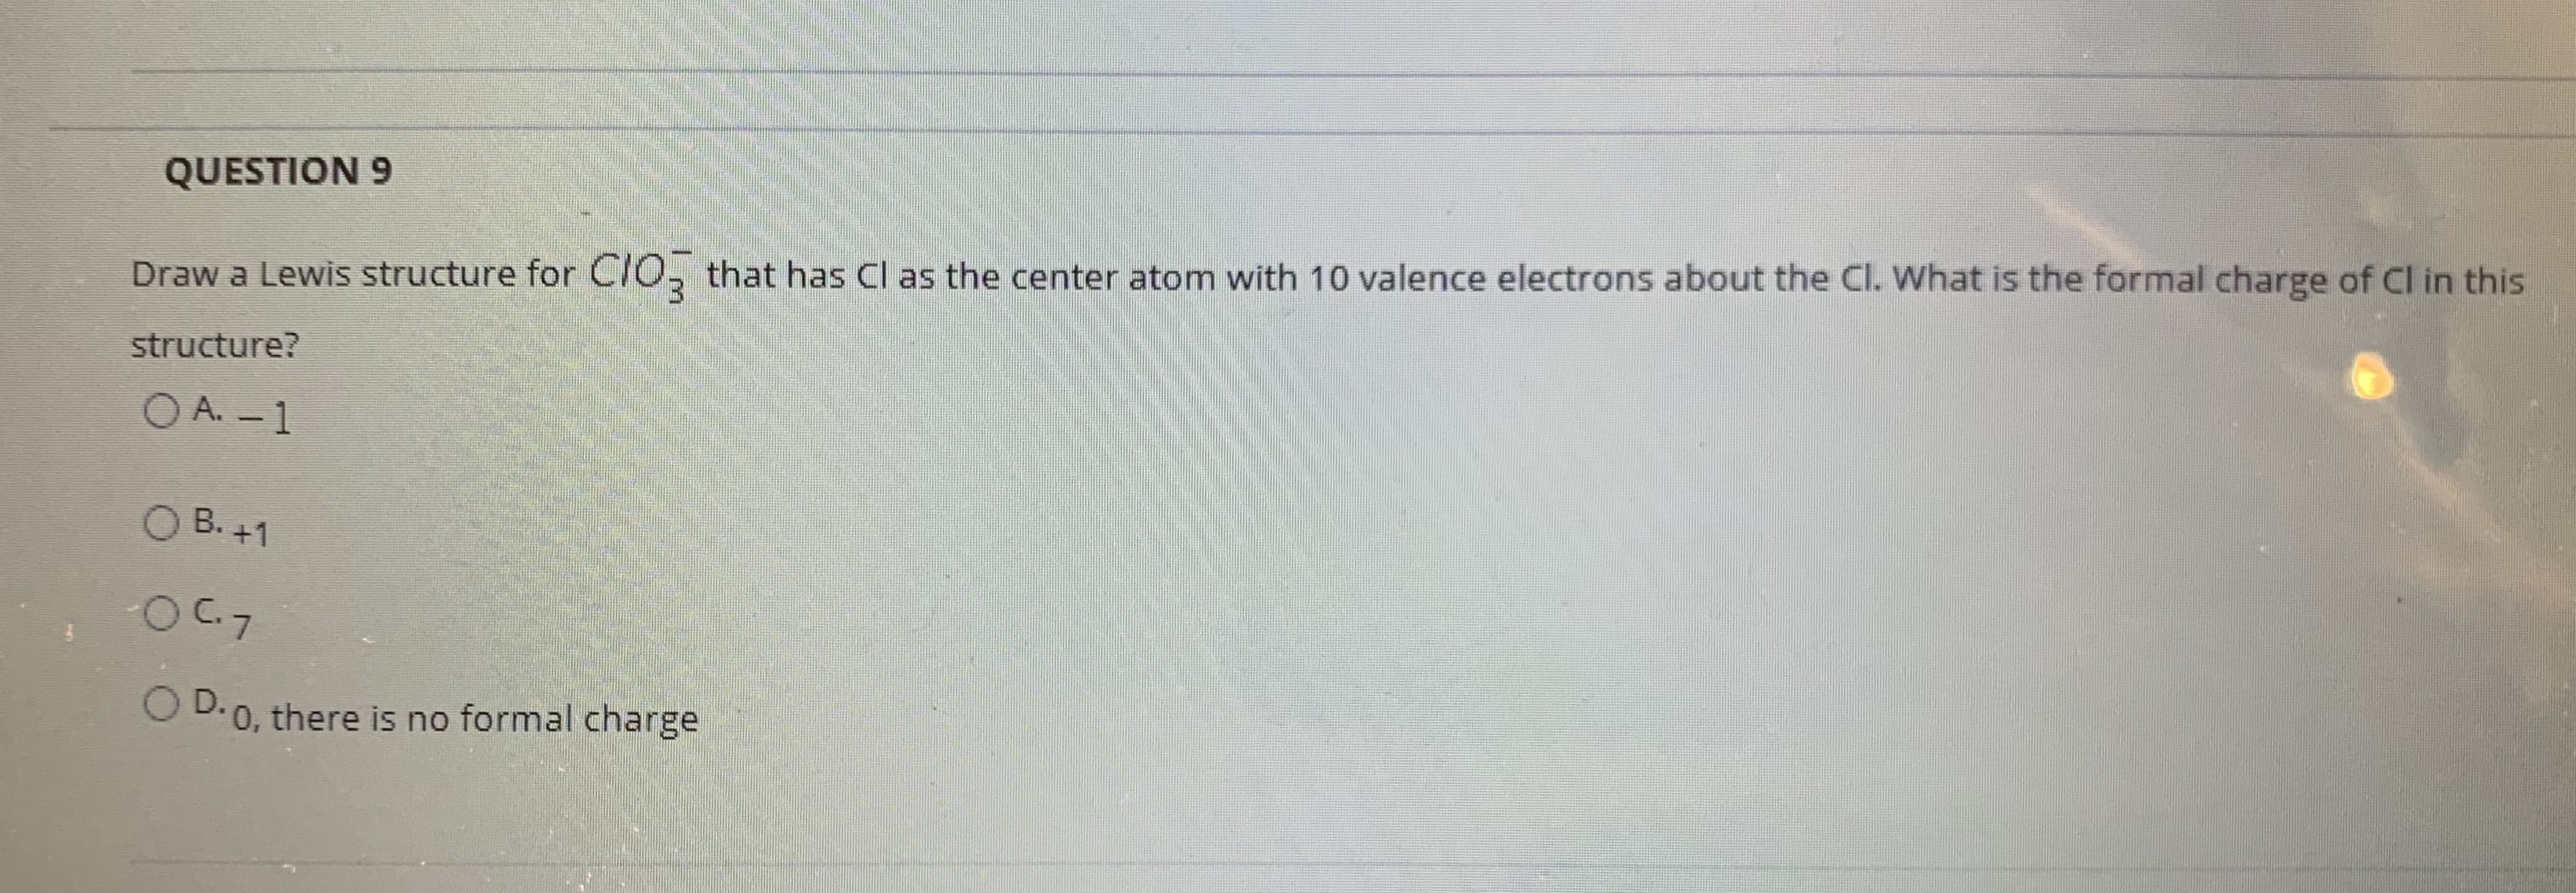 Draw a Lewis structure for C/0, that has Cl as the center atom with 10 valence electrons about the Cl. What is the formal charge of Cl in this
3.
structure?
